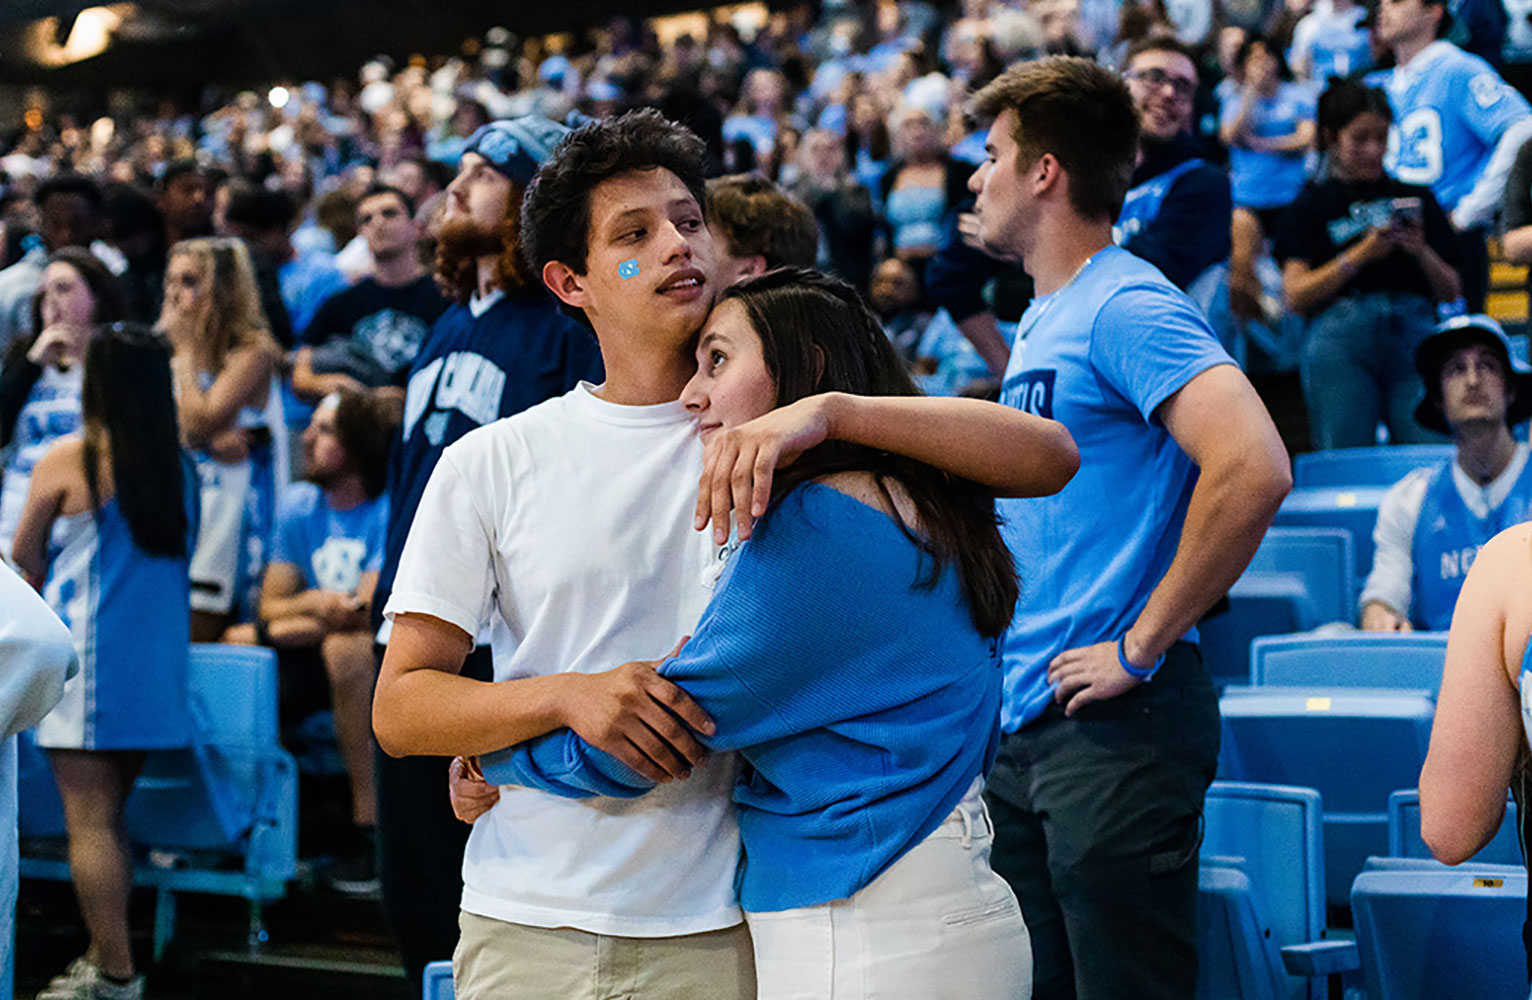 When the Tar Heels narrowly lost 72-69, fans quietly began to gather their belongings with resignation, then paused to listen as James Taylor’s “Carolina in my Mind” played on the stadium’s speakers. (Photo by Sarah Wood/UNC-Chapel Hill)